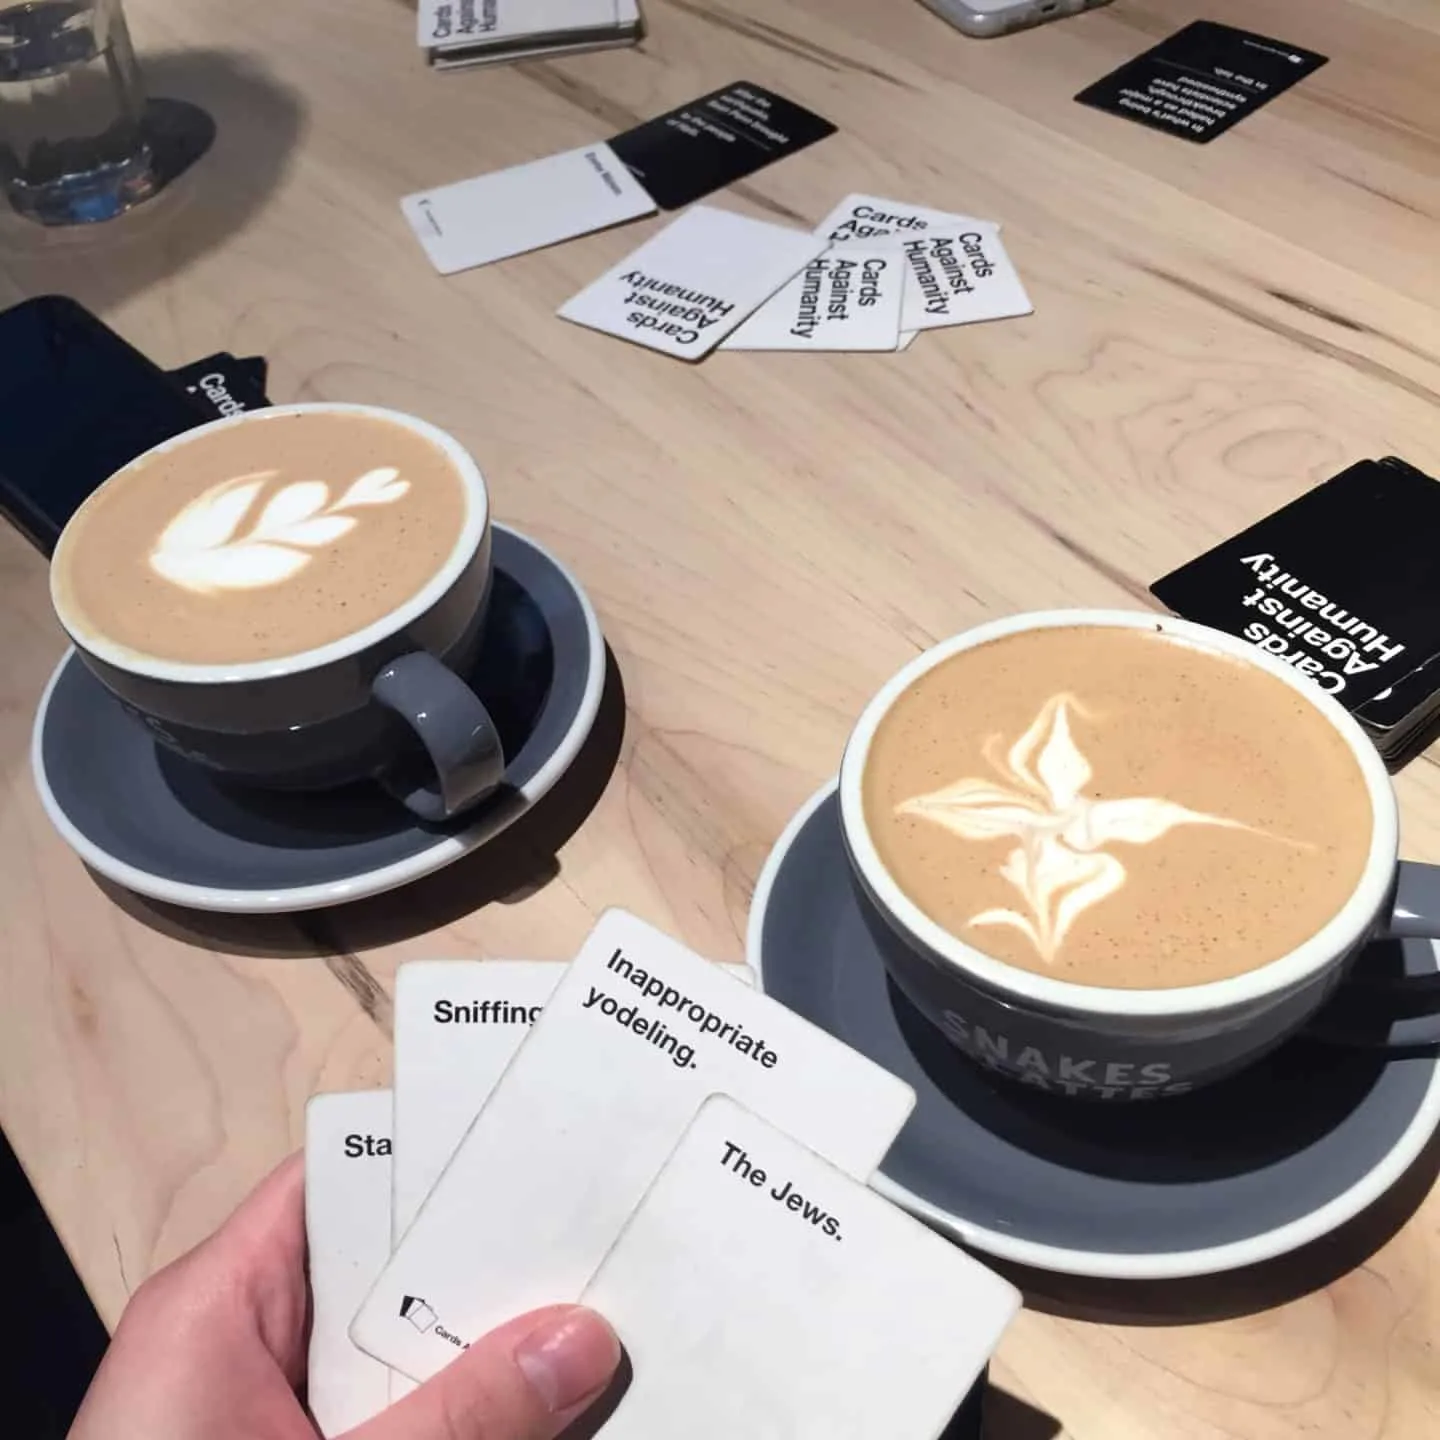 All-you-can-play board games at Snakes and Lattes in Toronto